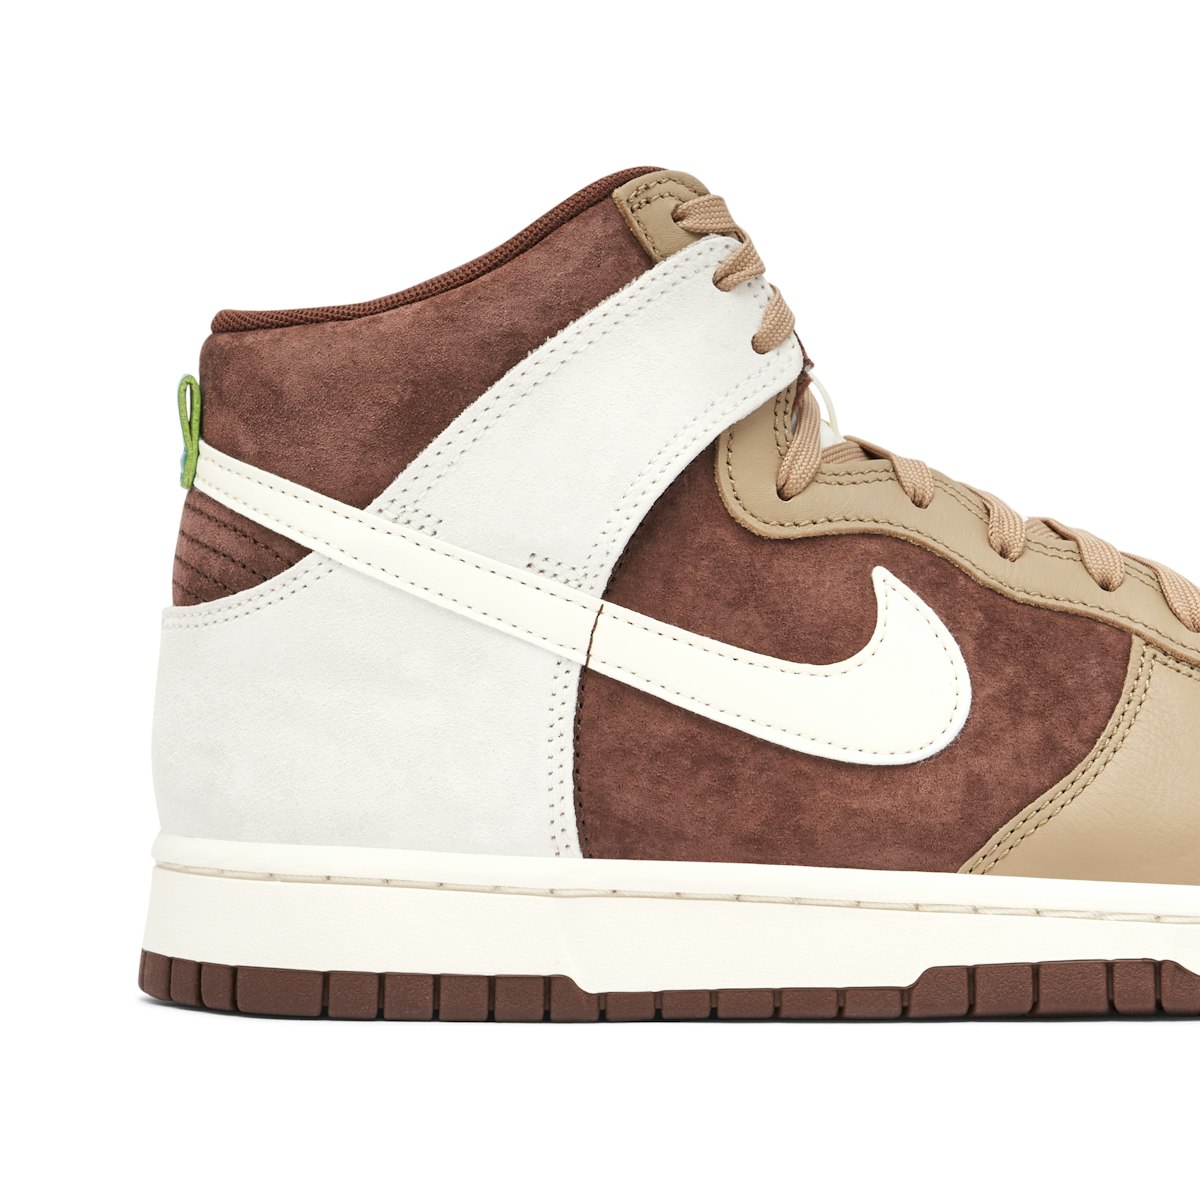 Chocolate' Nike Dunk Highs Are Coming Soon